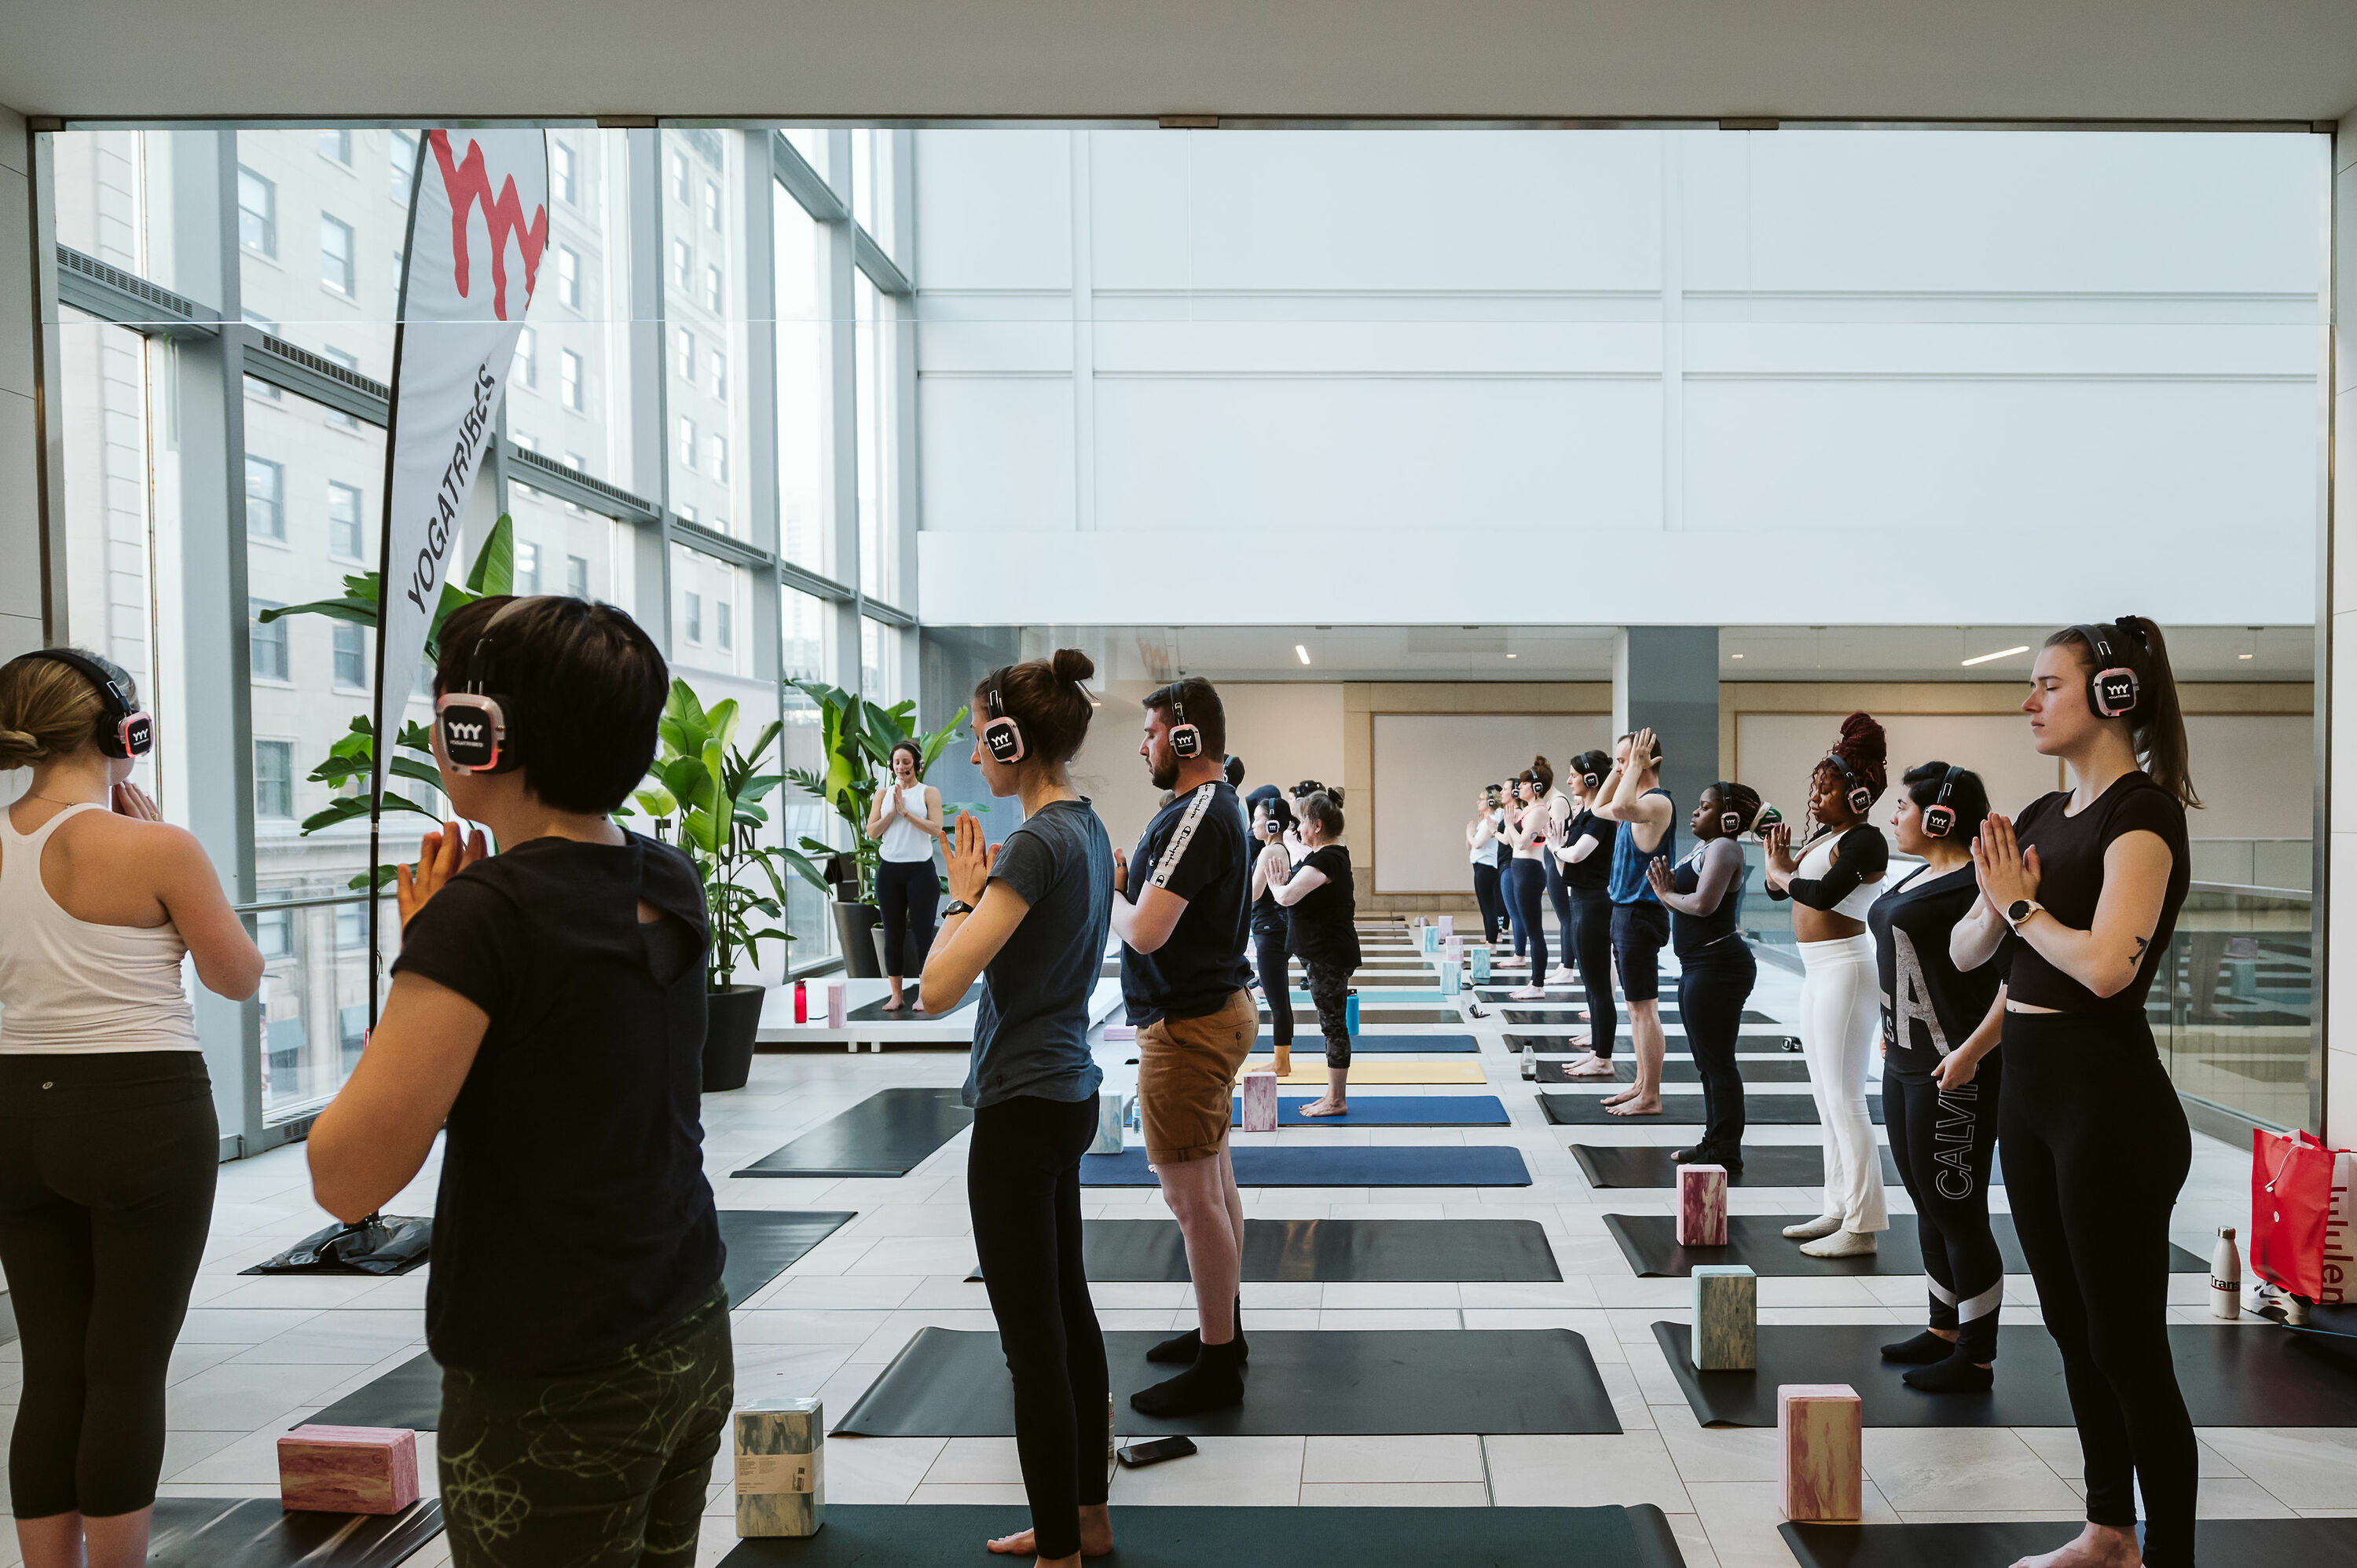 Don't miss the free immersive yoga classes in downtown Montreal